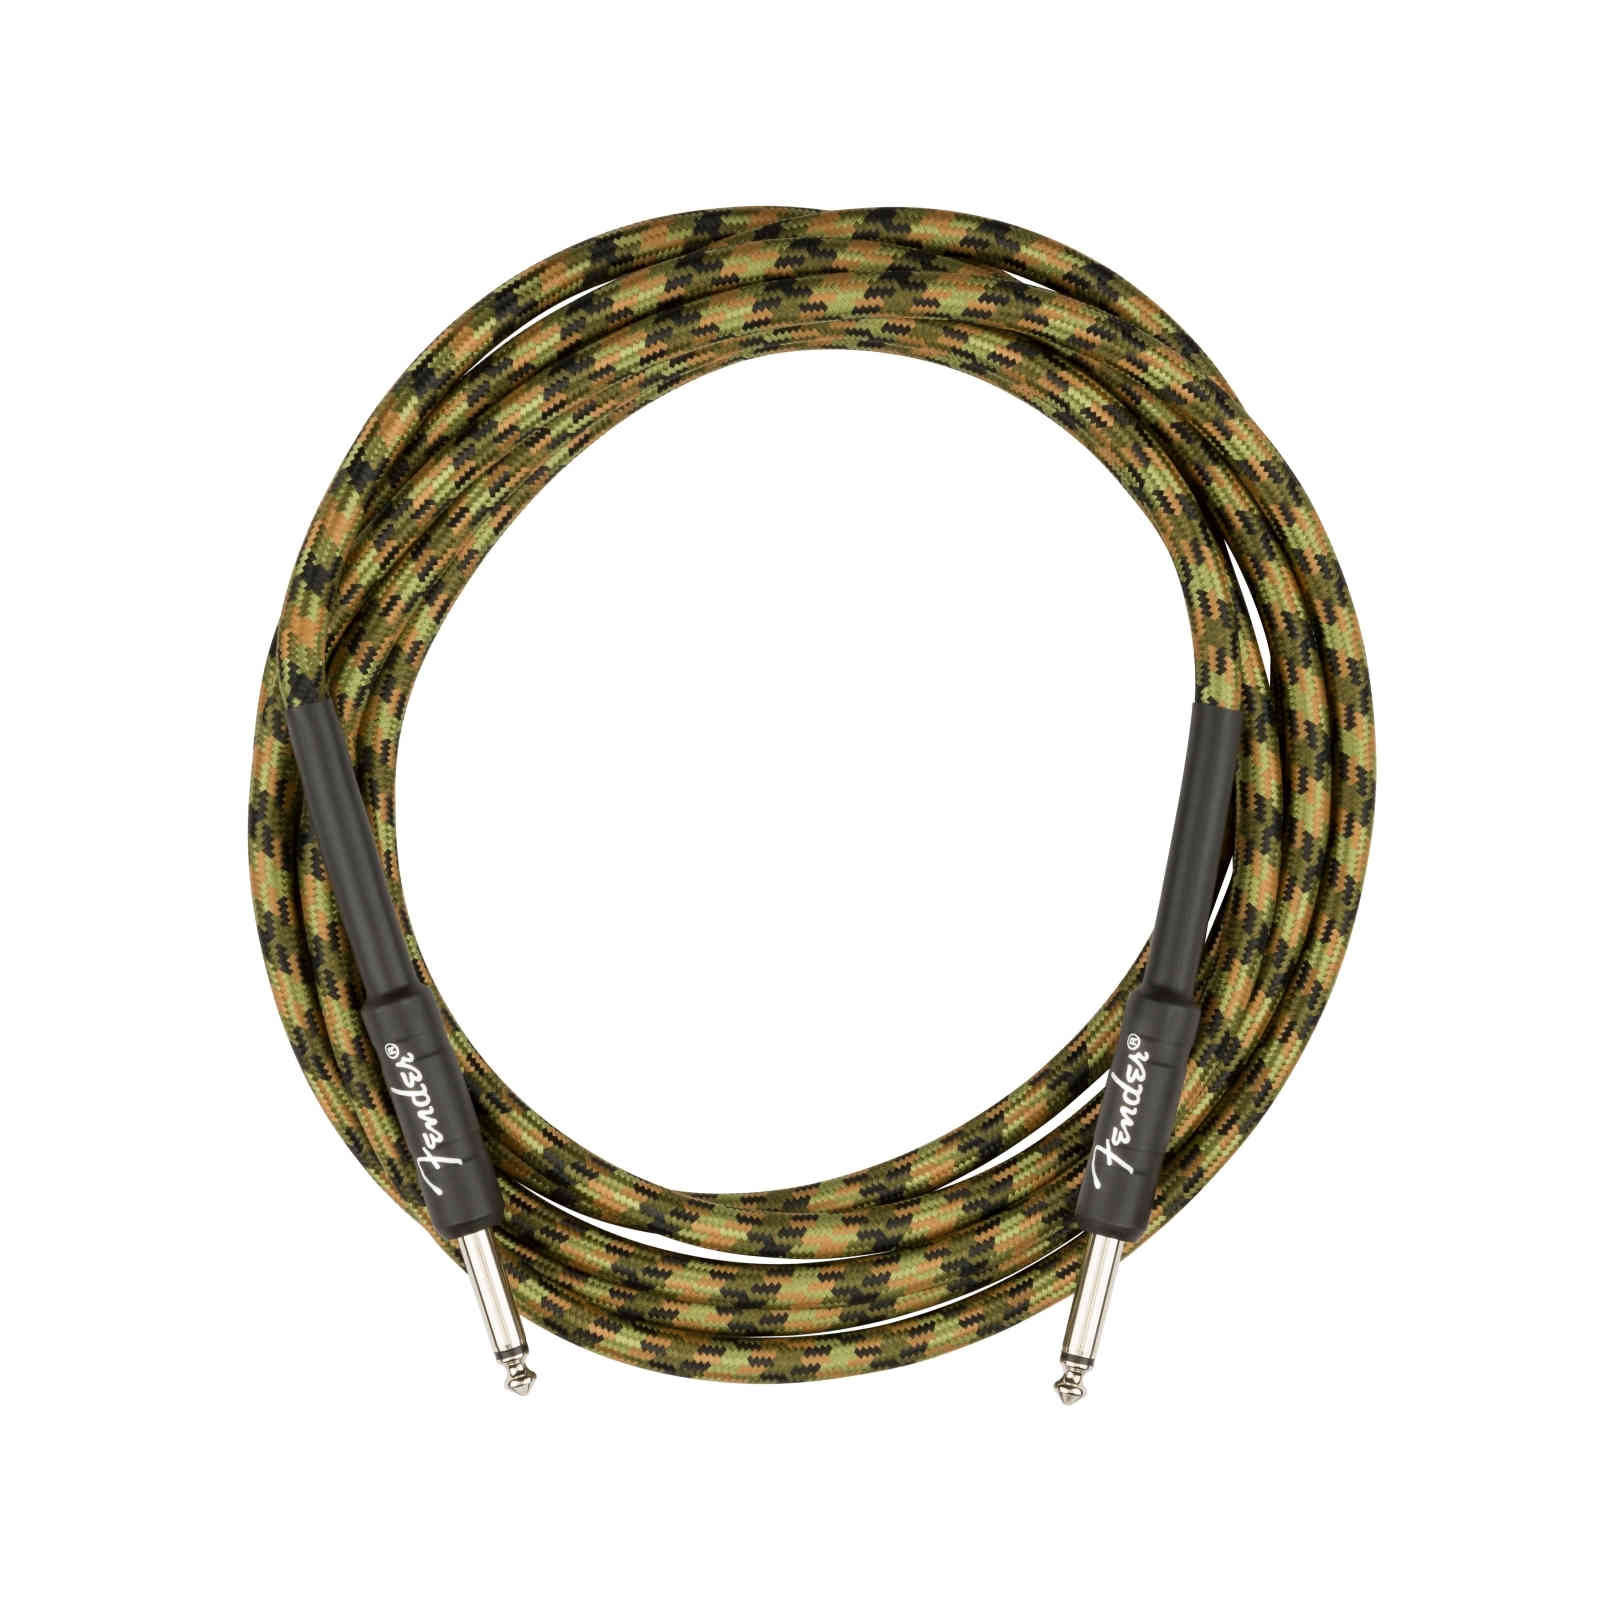 Fender Professional Series Instrument Cable, 10 FT, Woodland Camo